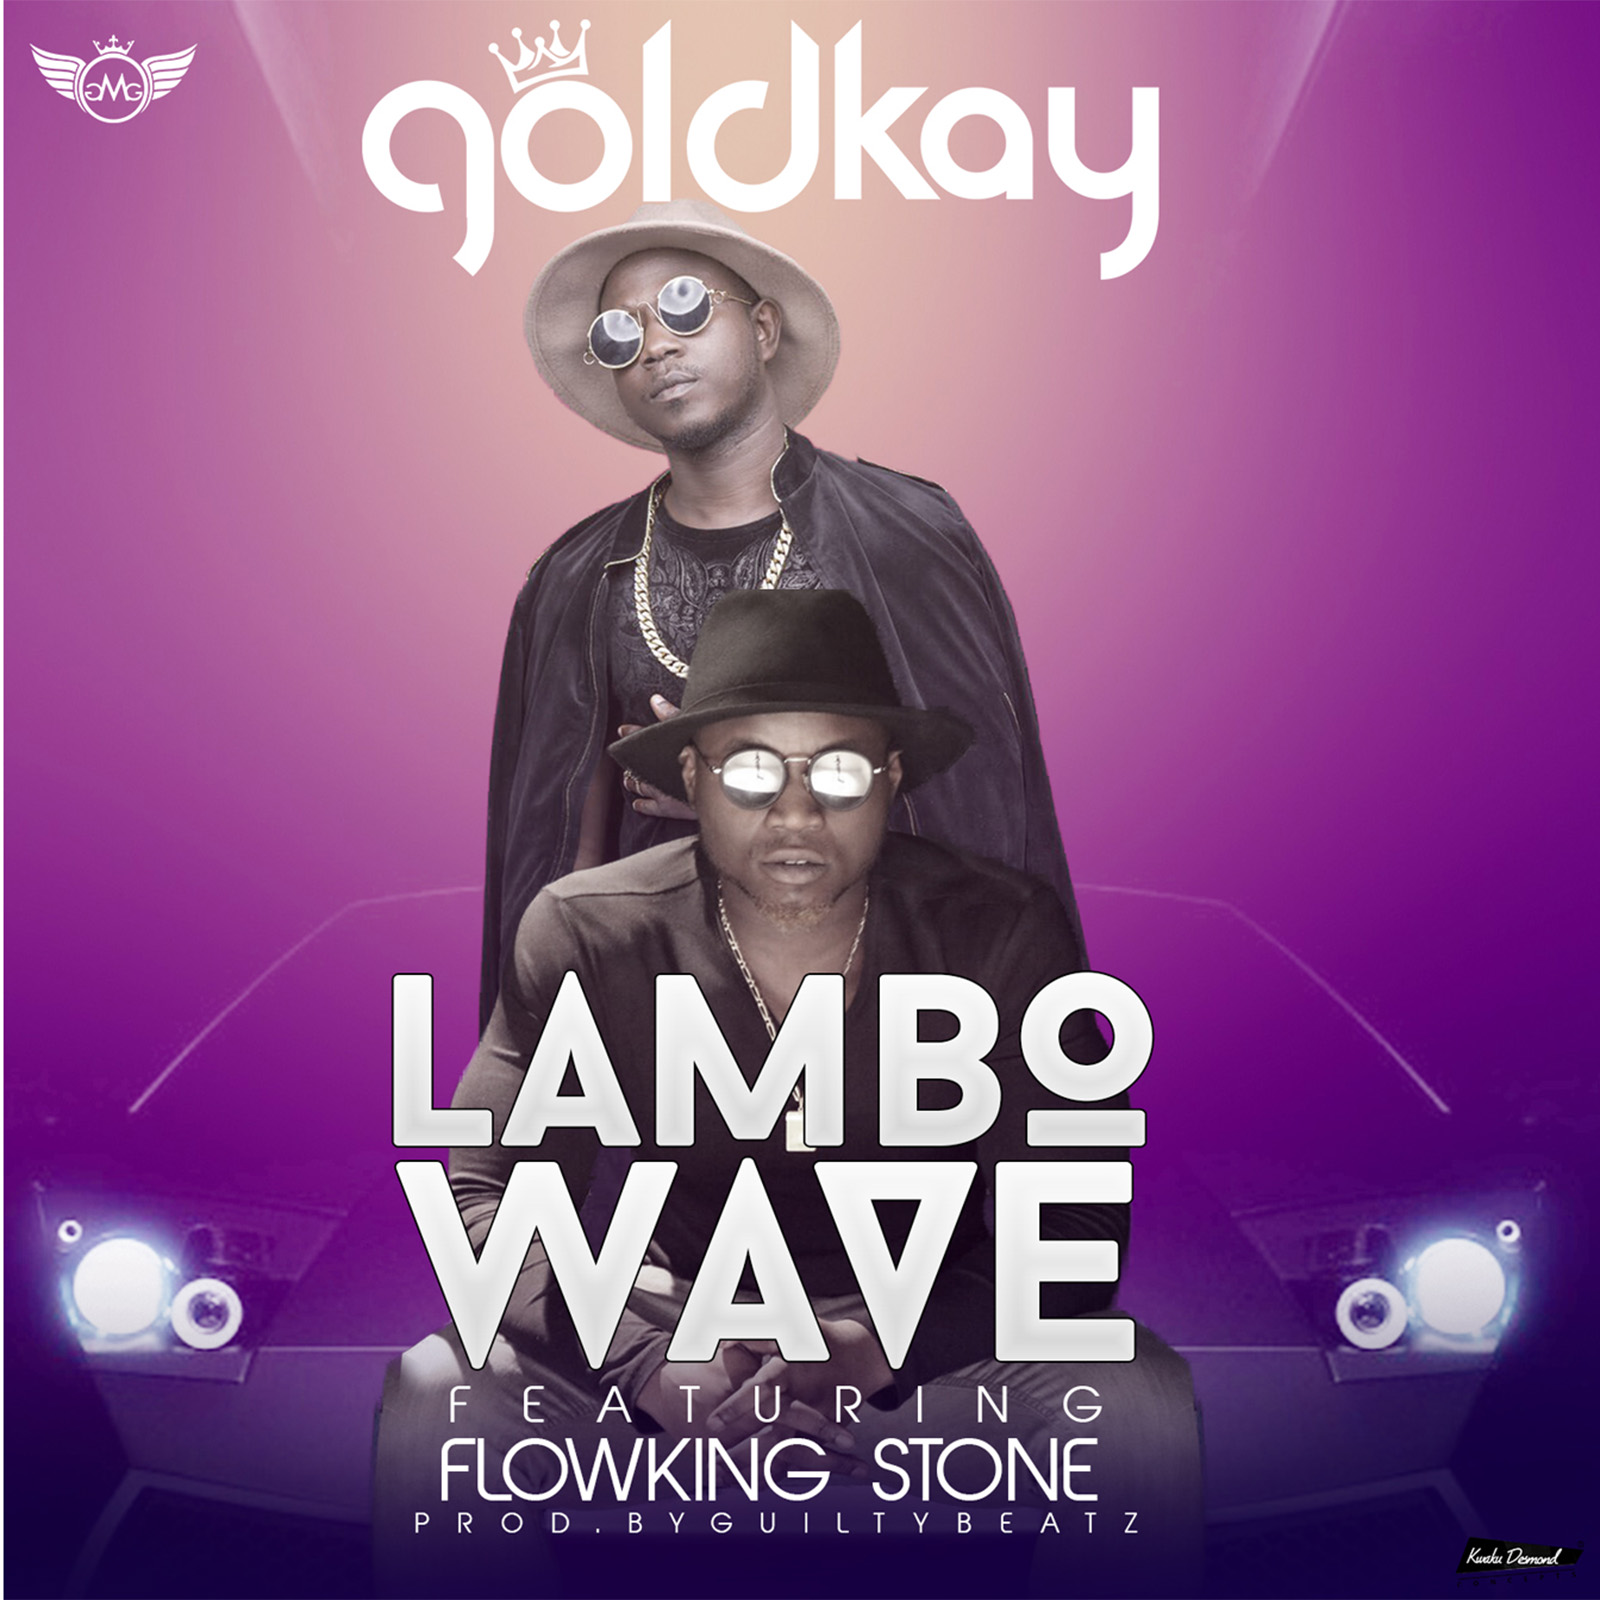 Lambo Wave by GoldKay feat. Flowking Stone